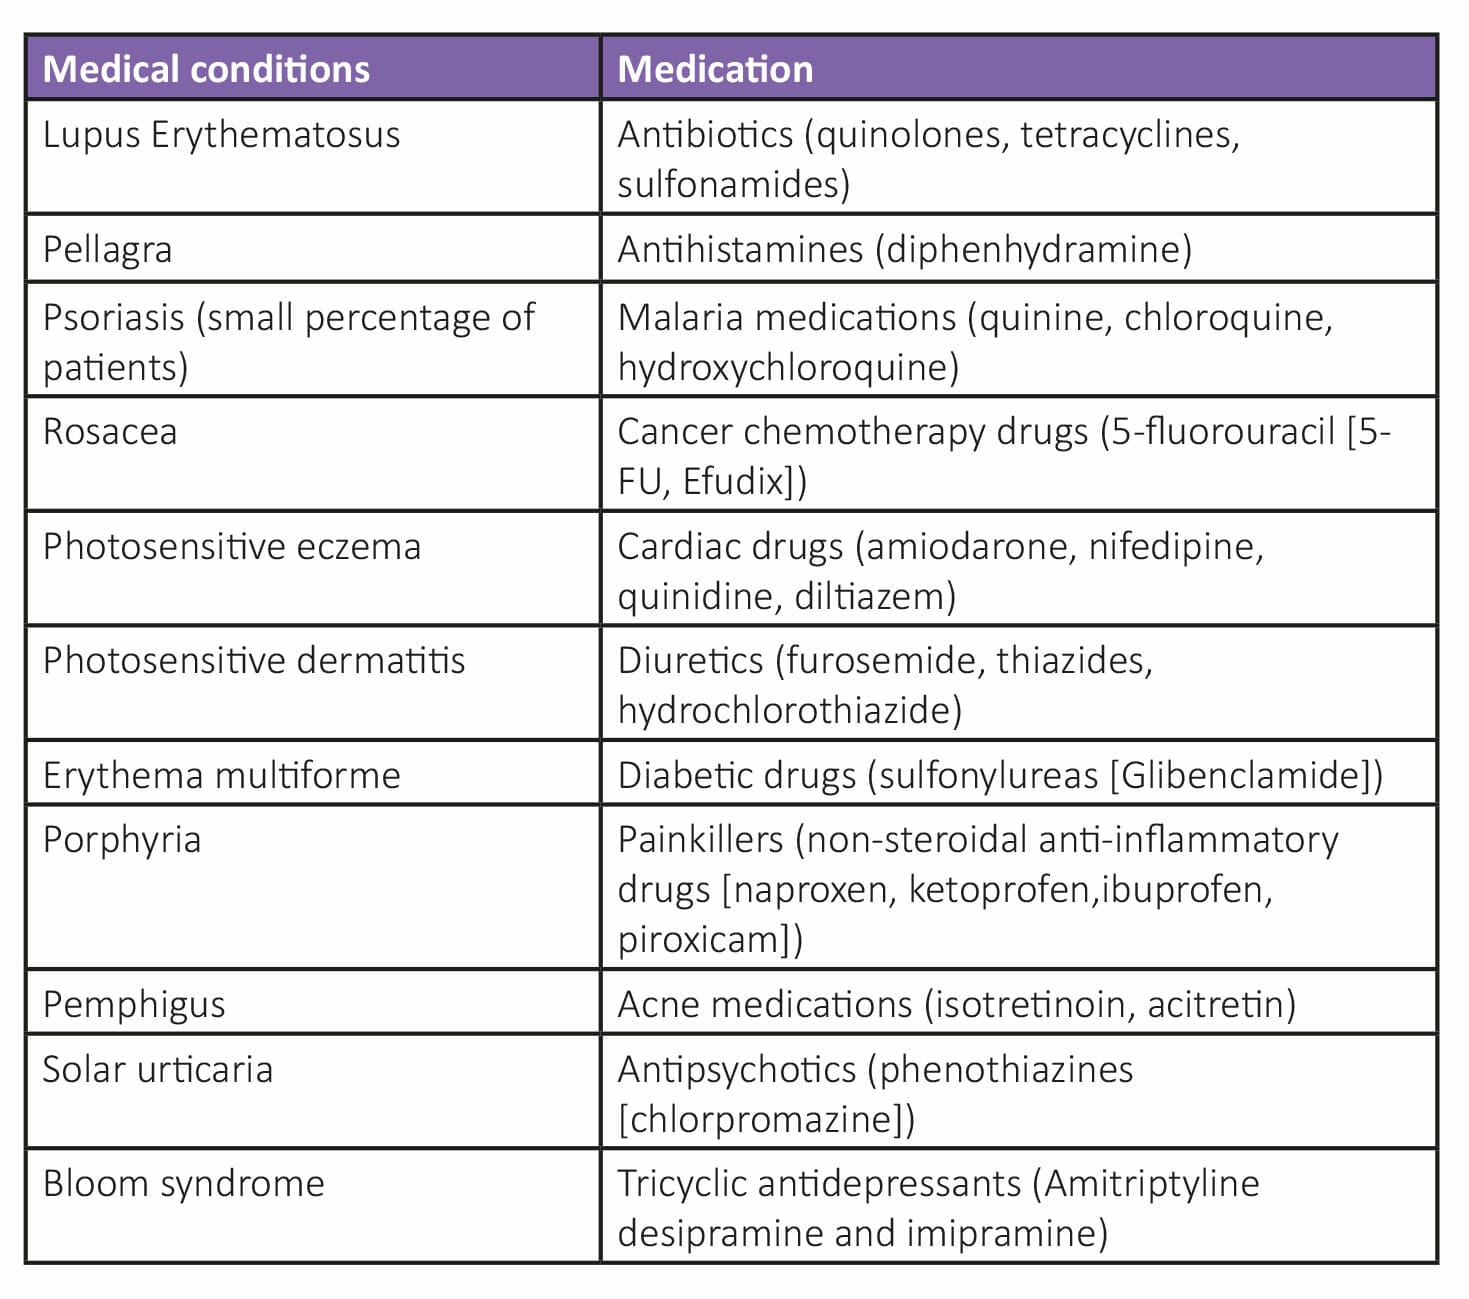 Table summarising common drugs and medical conditions associated with photosensitivity